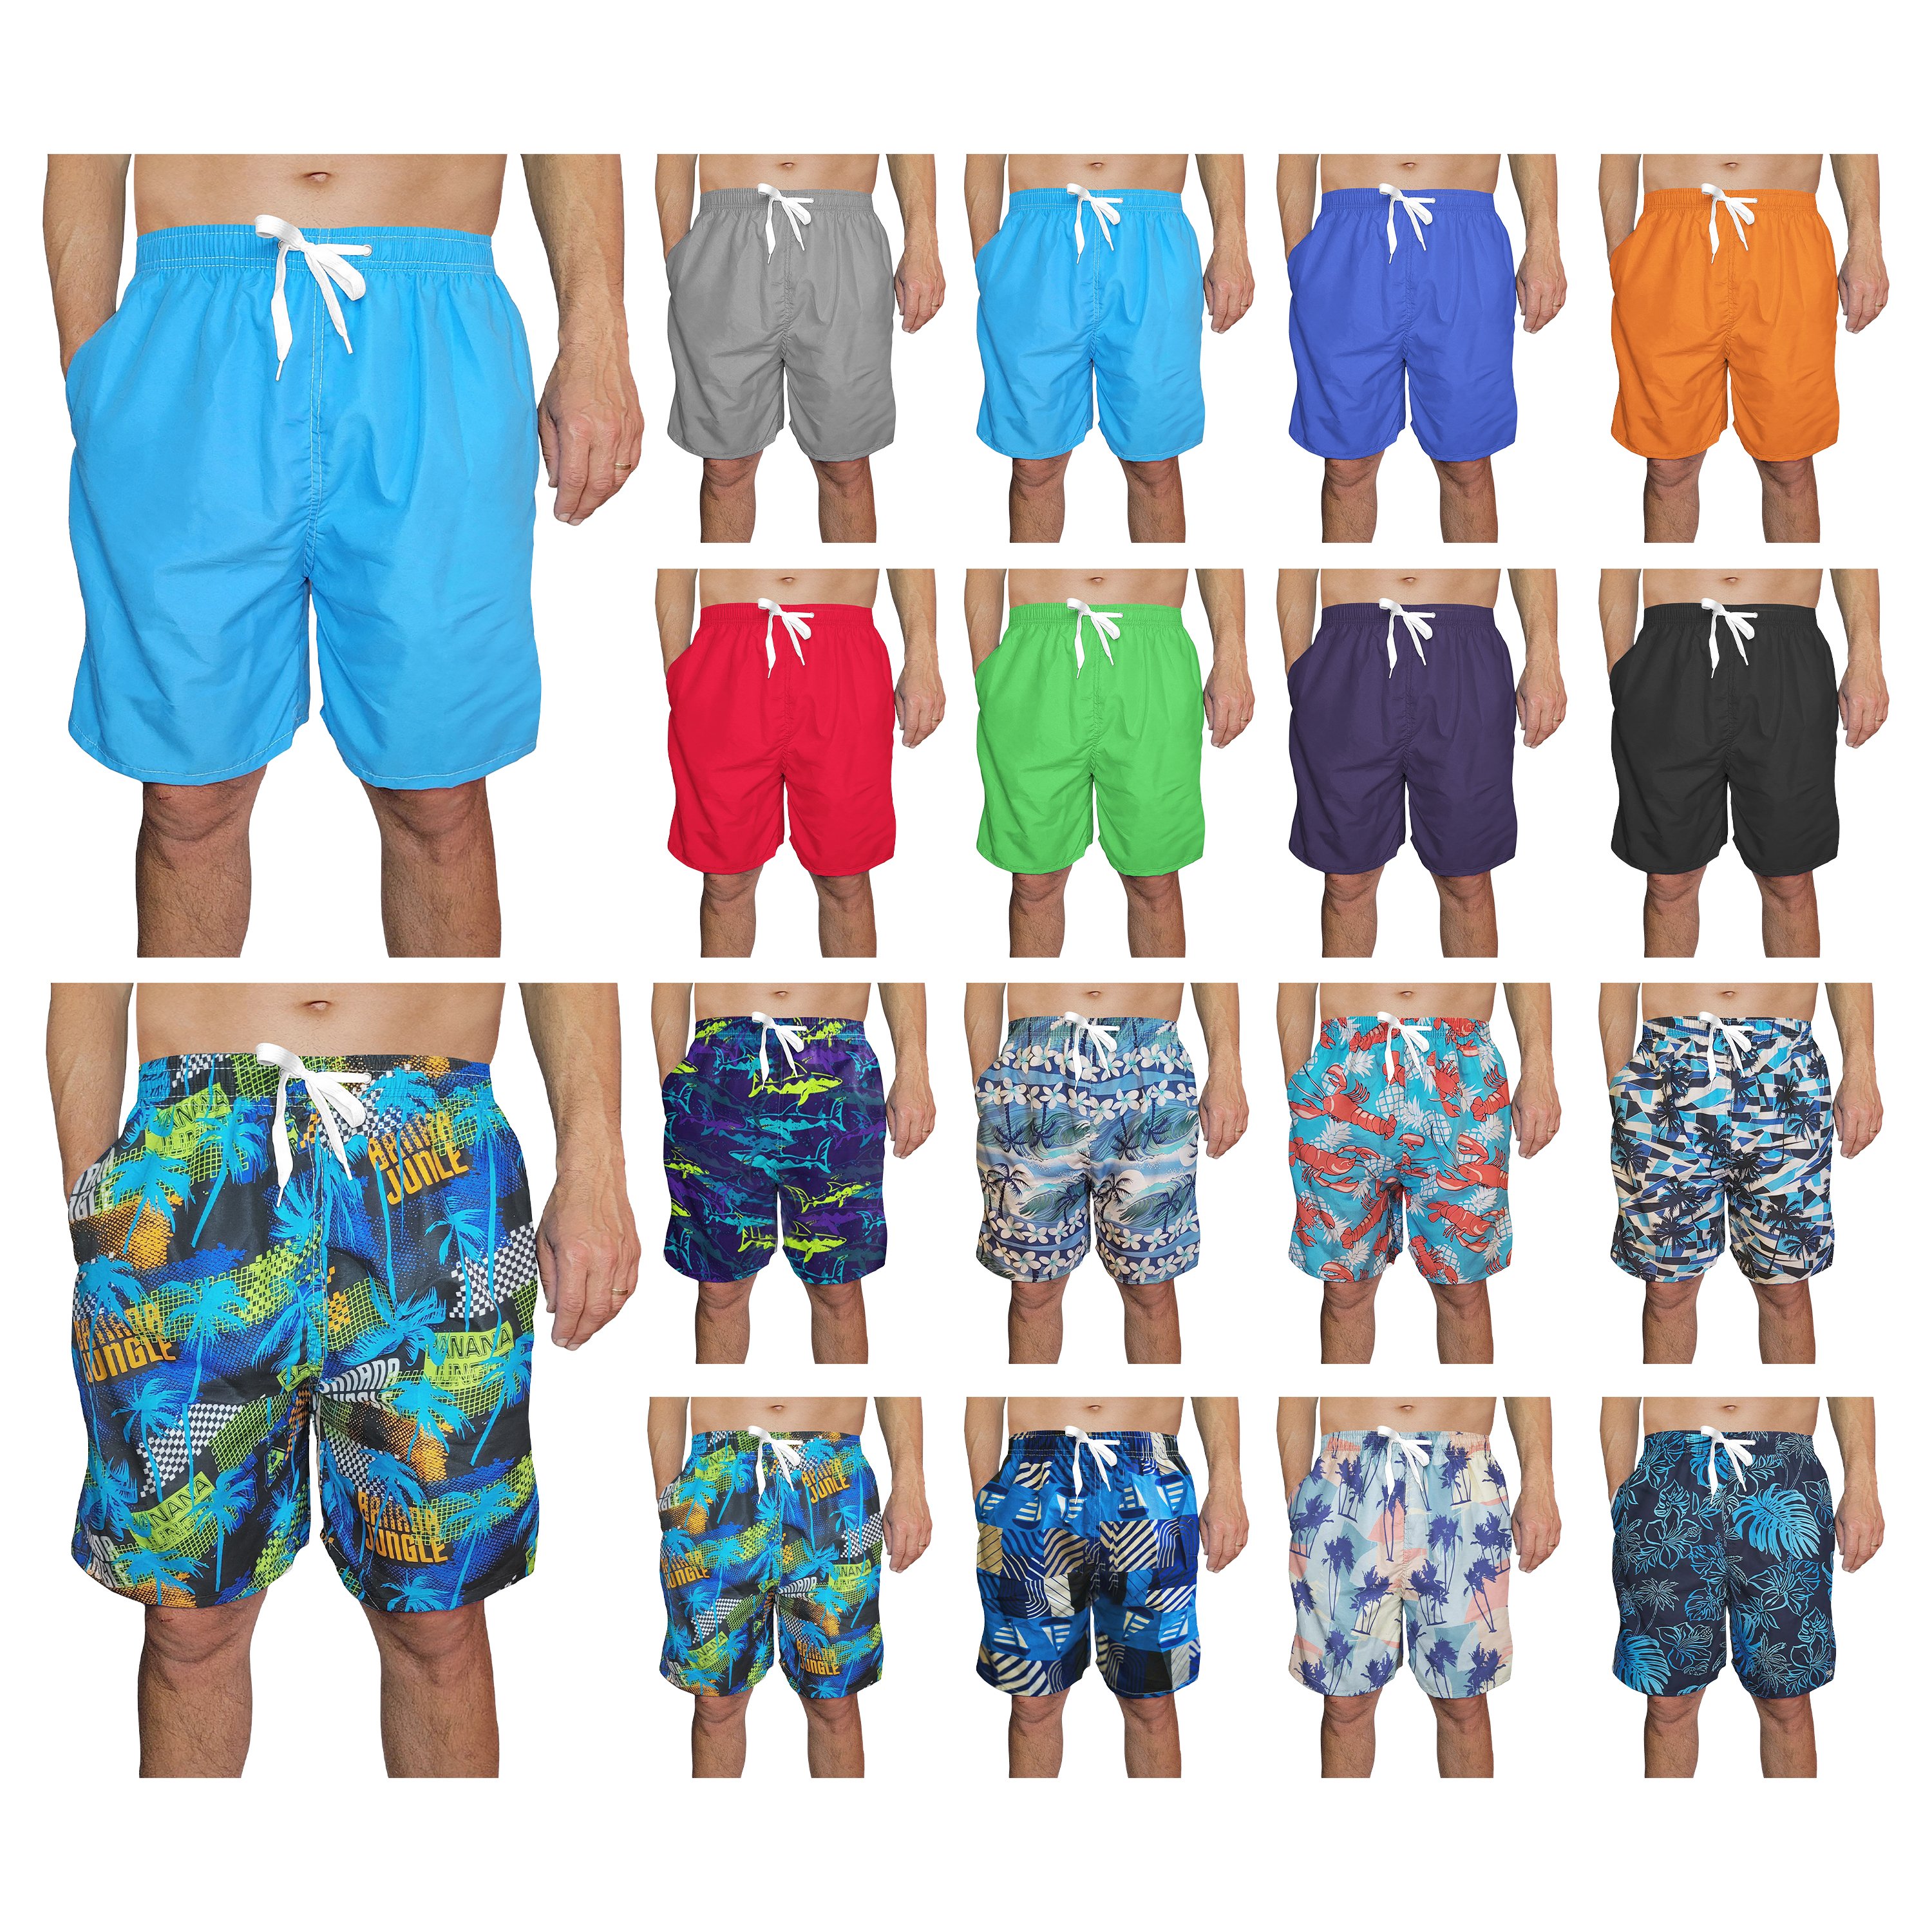 3-Pack: Men's Quick-Dry Solid & Printed Summer Beach Surf Board Swim Trunks Shorts - Large, Solid